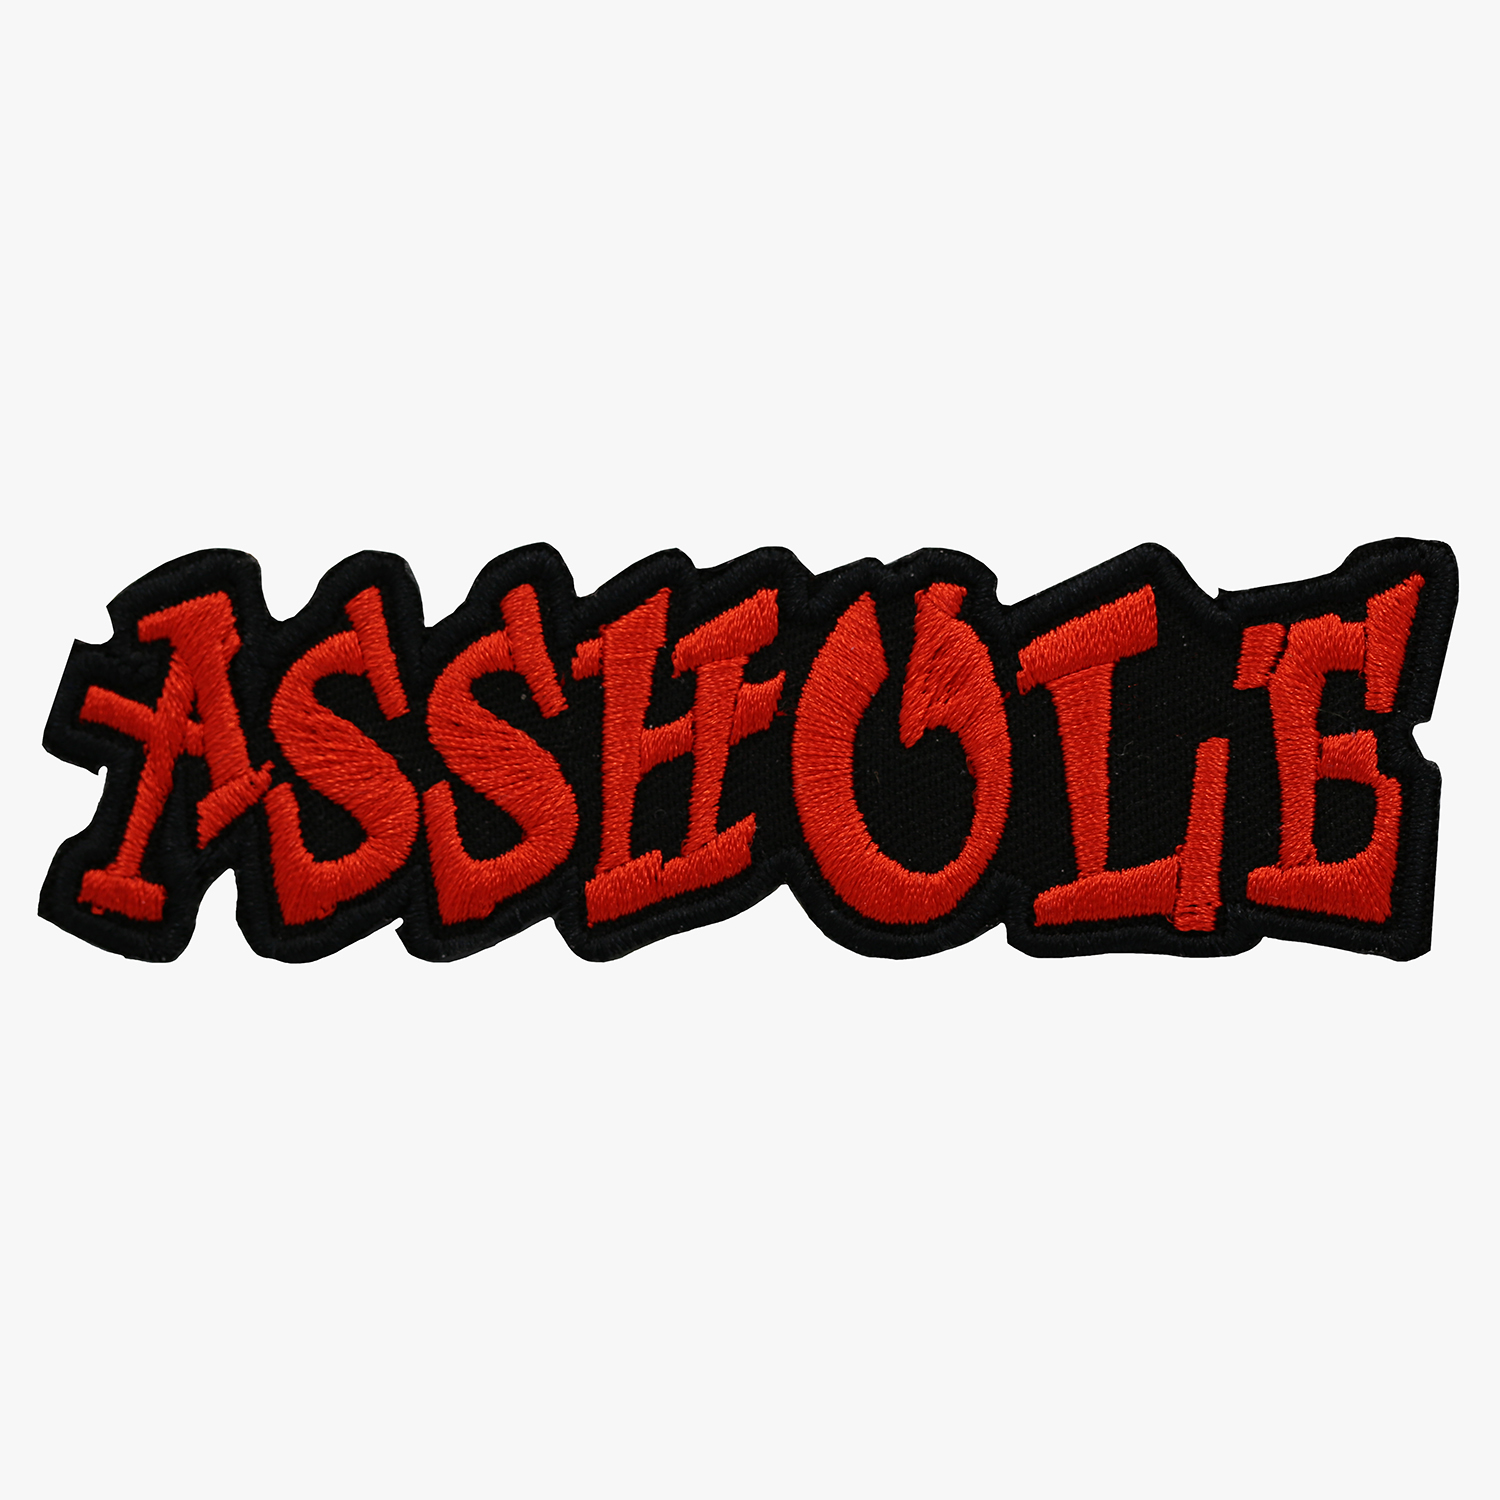 New Asshole Embroidered Biker Leather Vest Patch